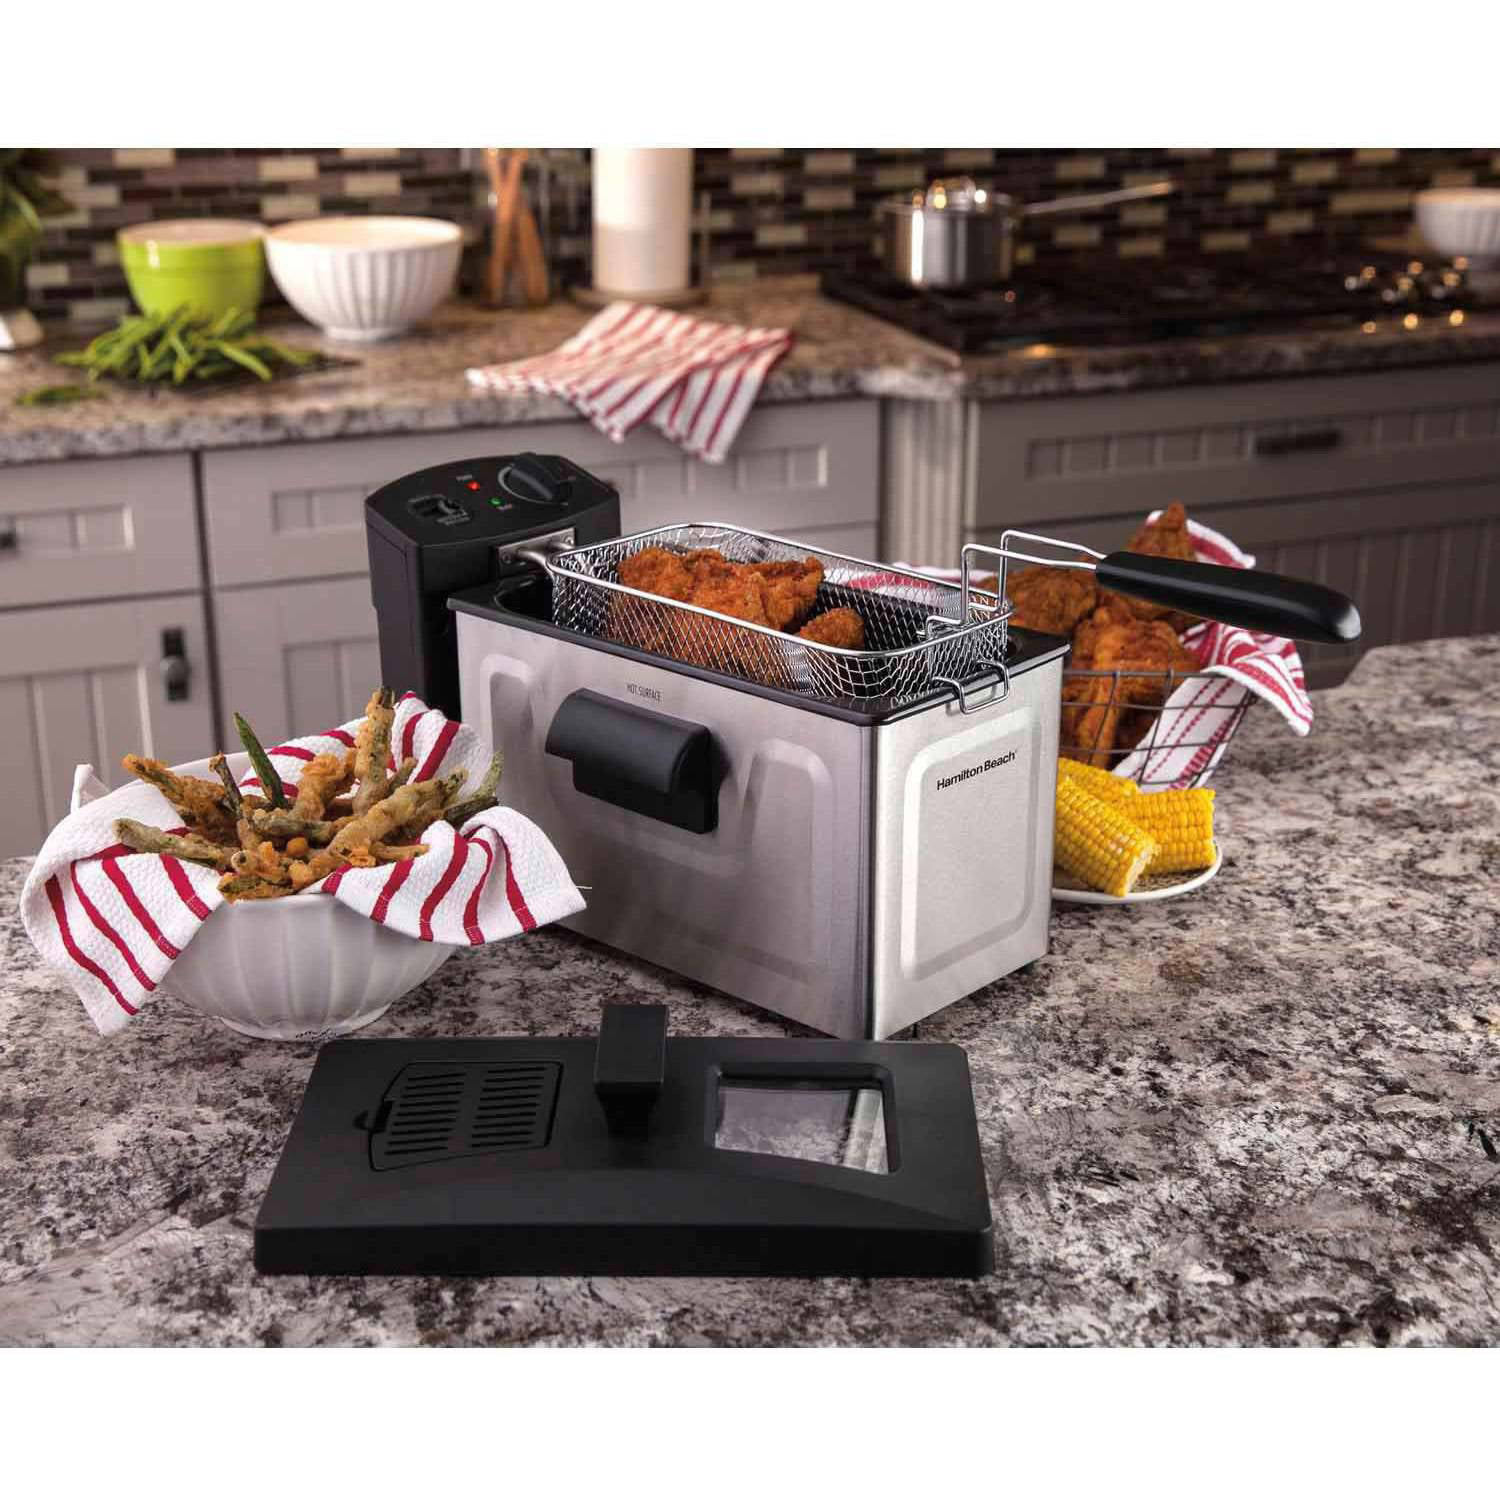 Hamilton Beach deep fryer is on sale for only $20 at Walmart